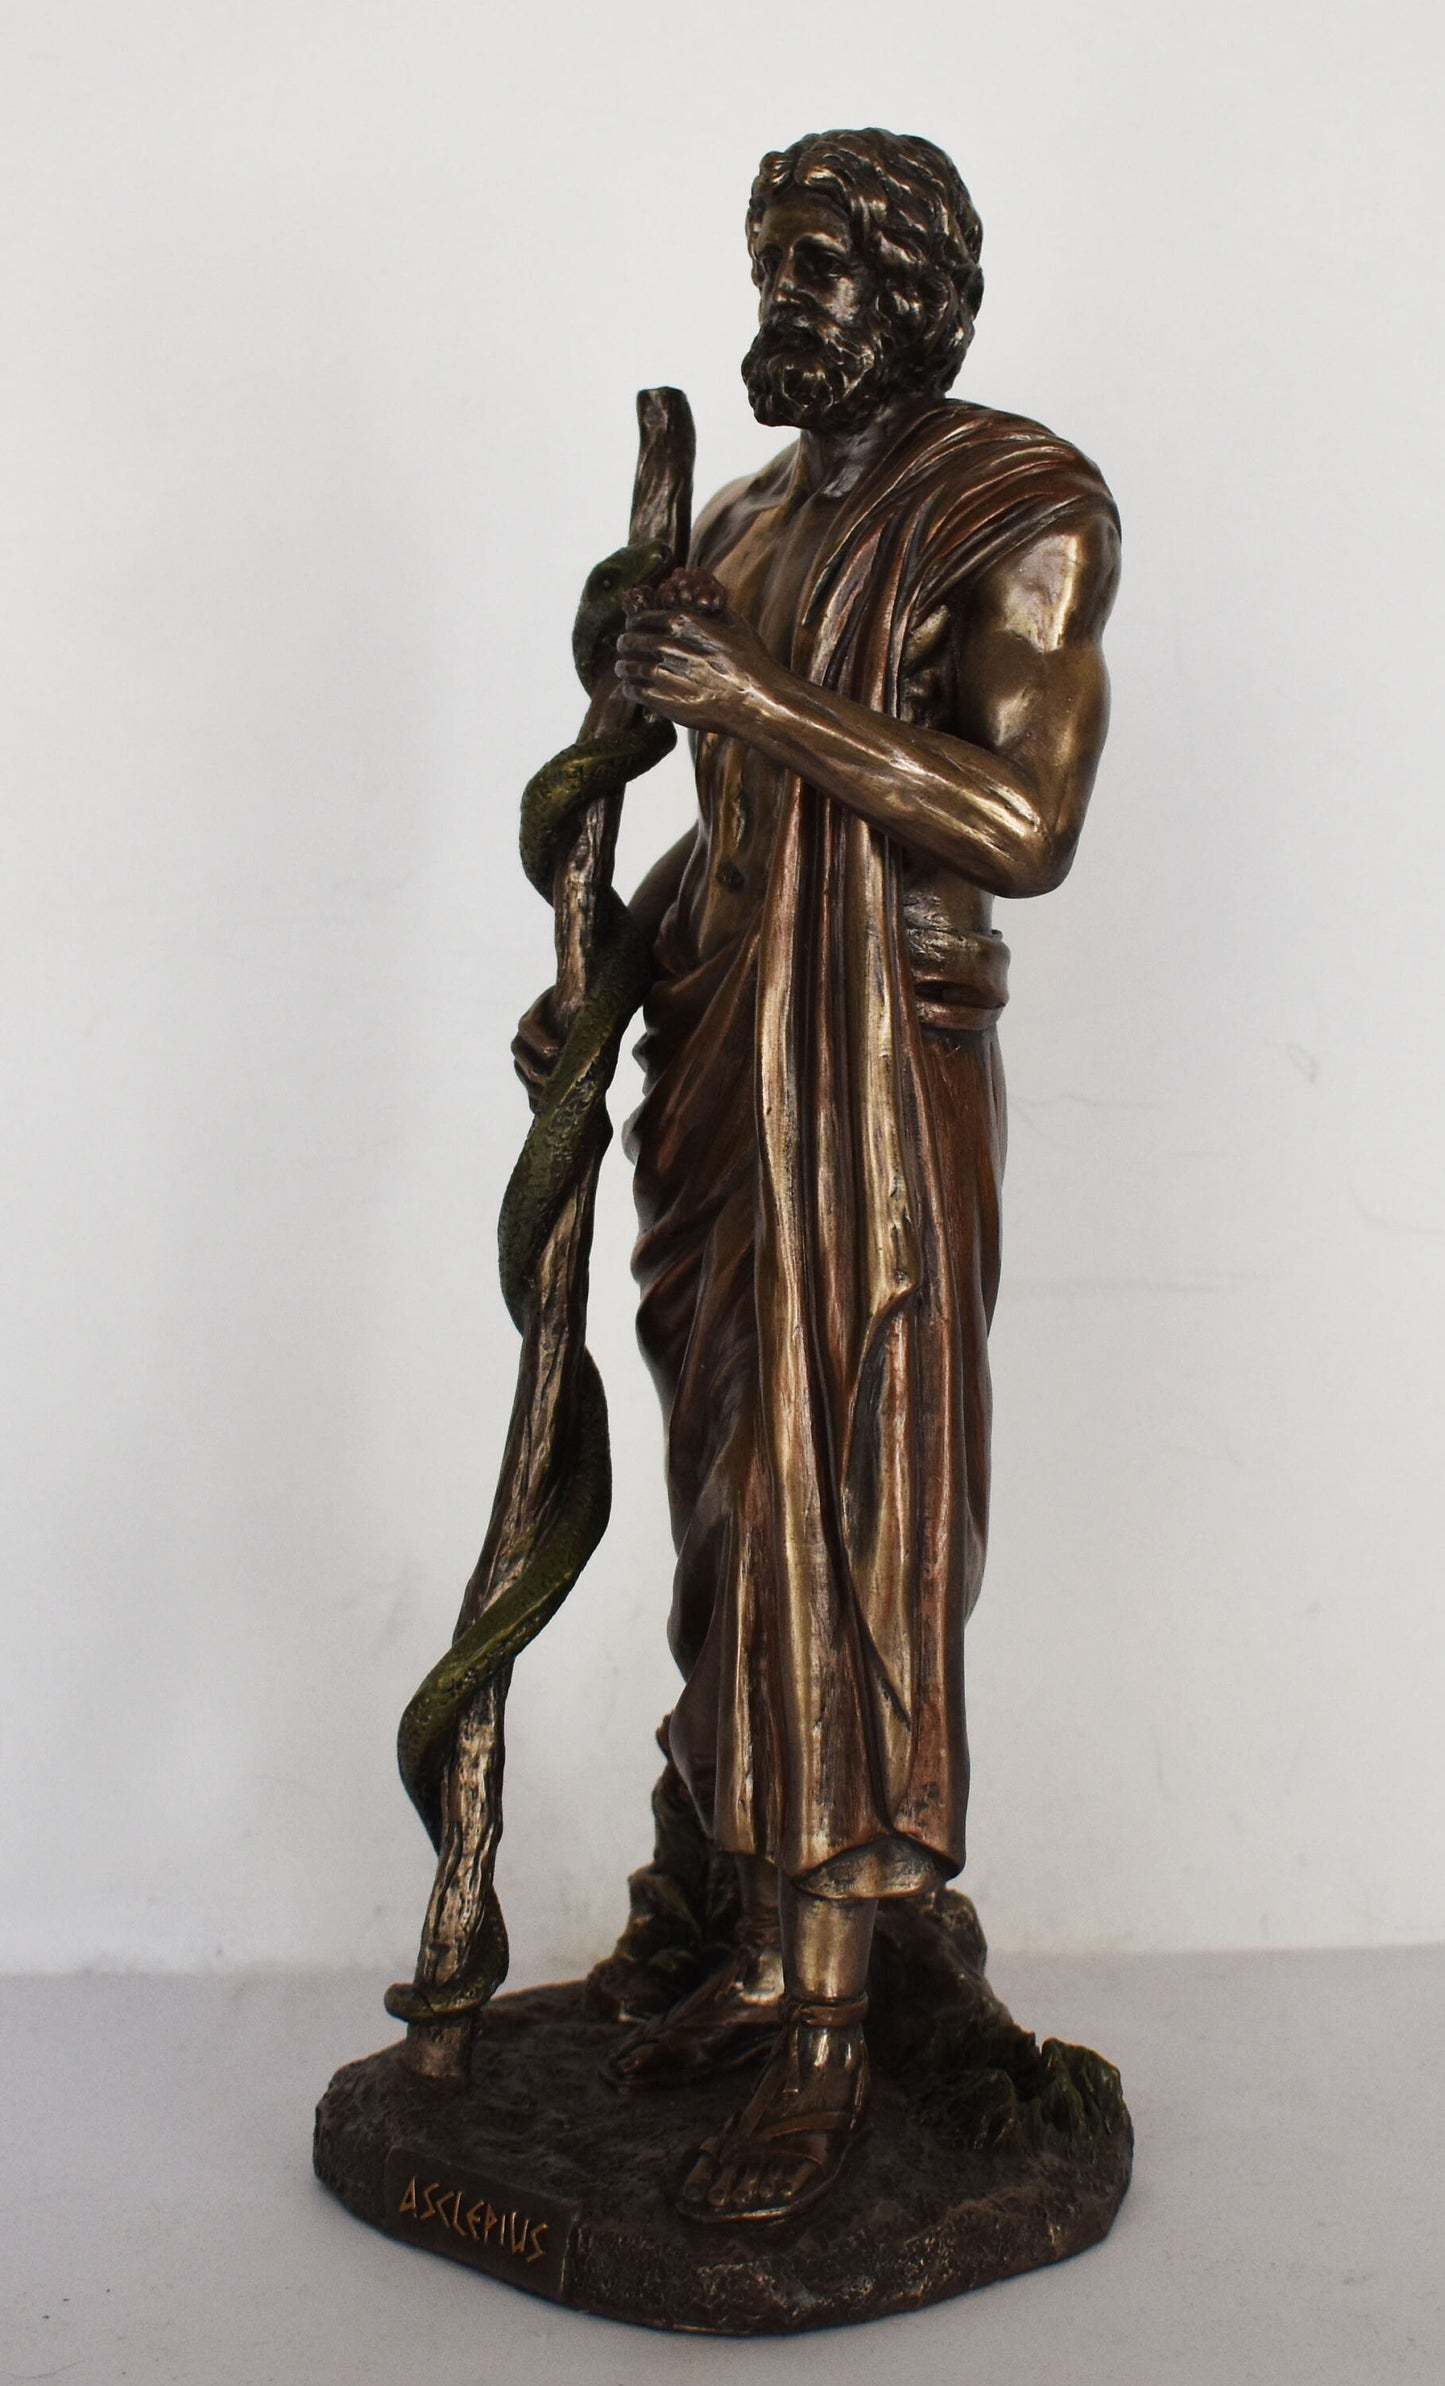 Asclepius - Ancient Hero - Greece - God of Medicine and Doctors - Represents the Healing Aspect of the Medical Arts - Cold Cast Bronze Resin